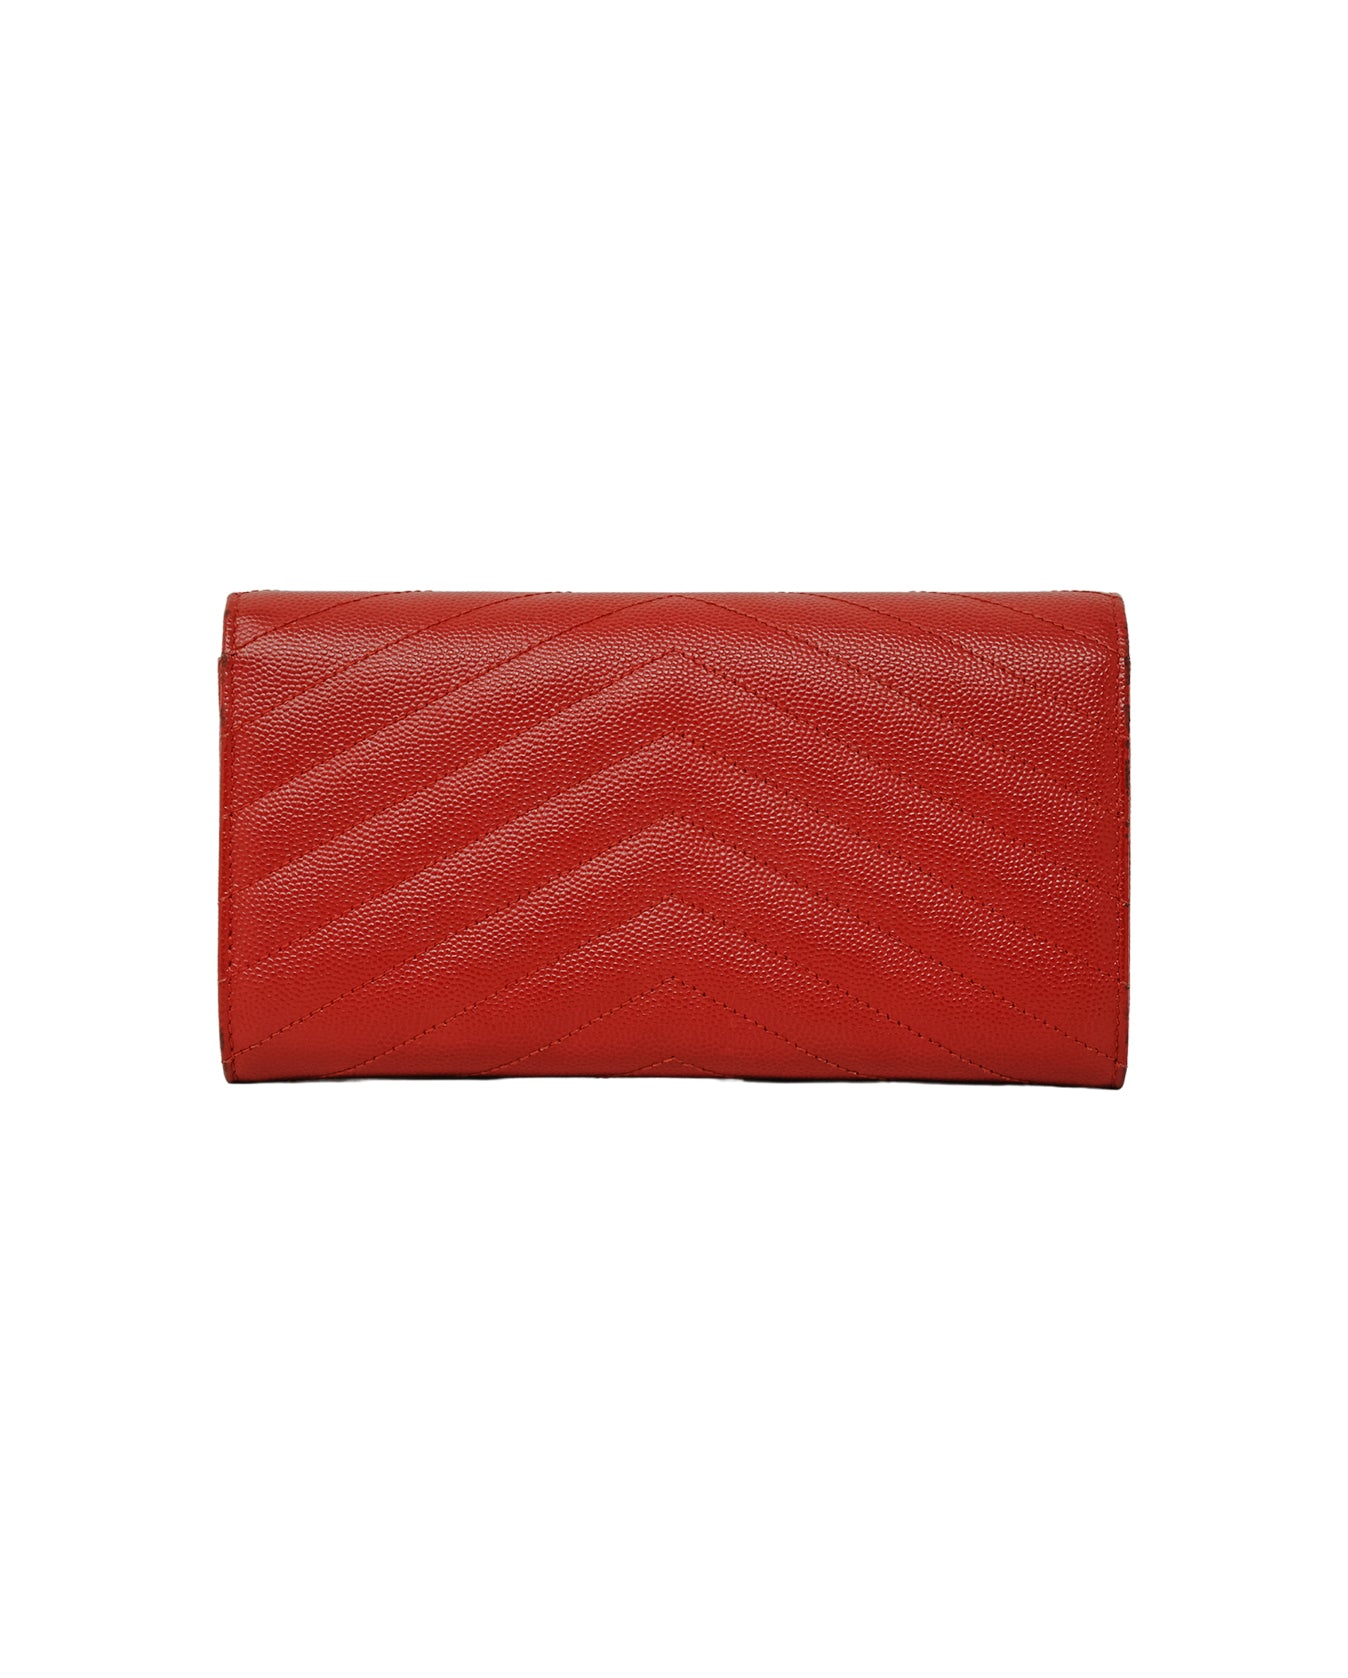 Yves Saint Laurent Red Chevron Quilted Leather Large Envelope Bag